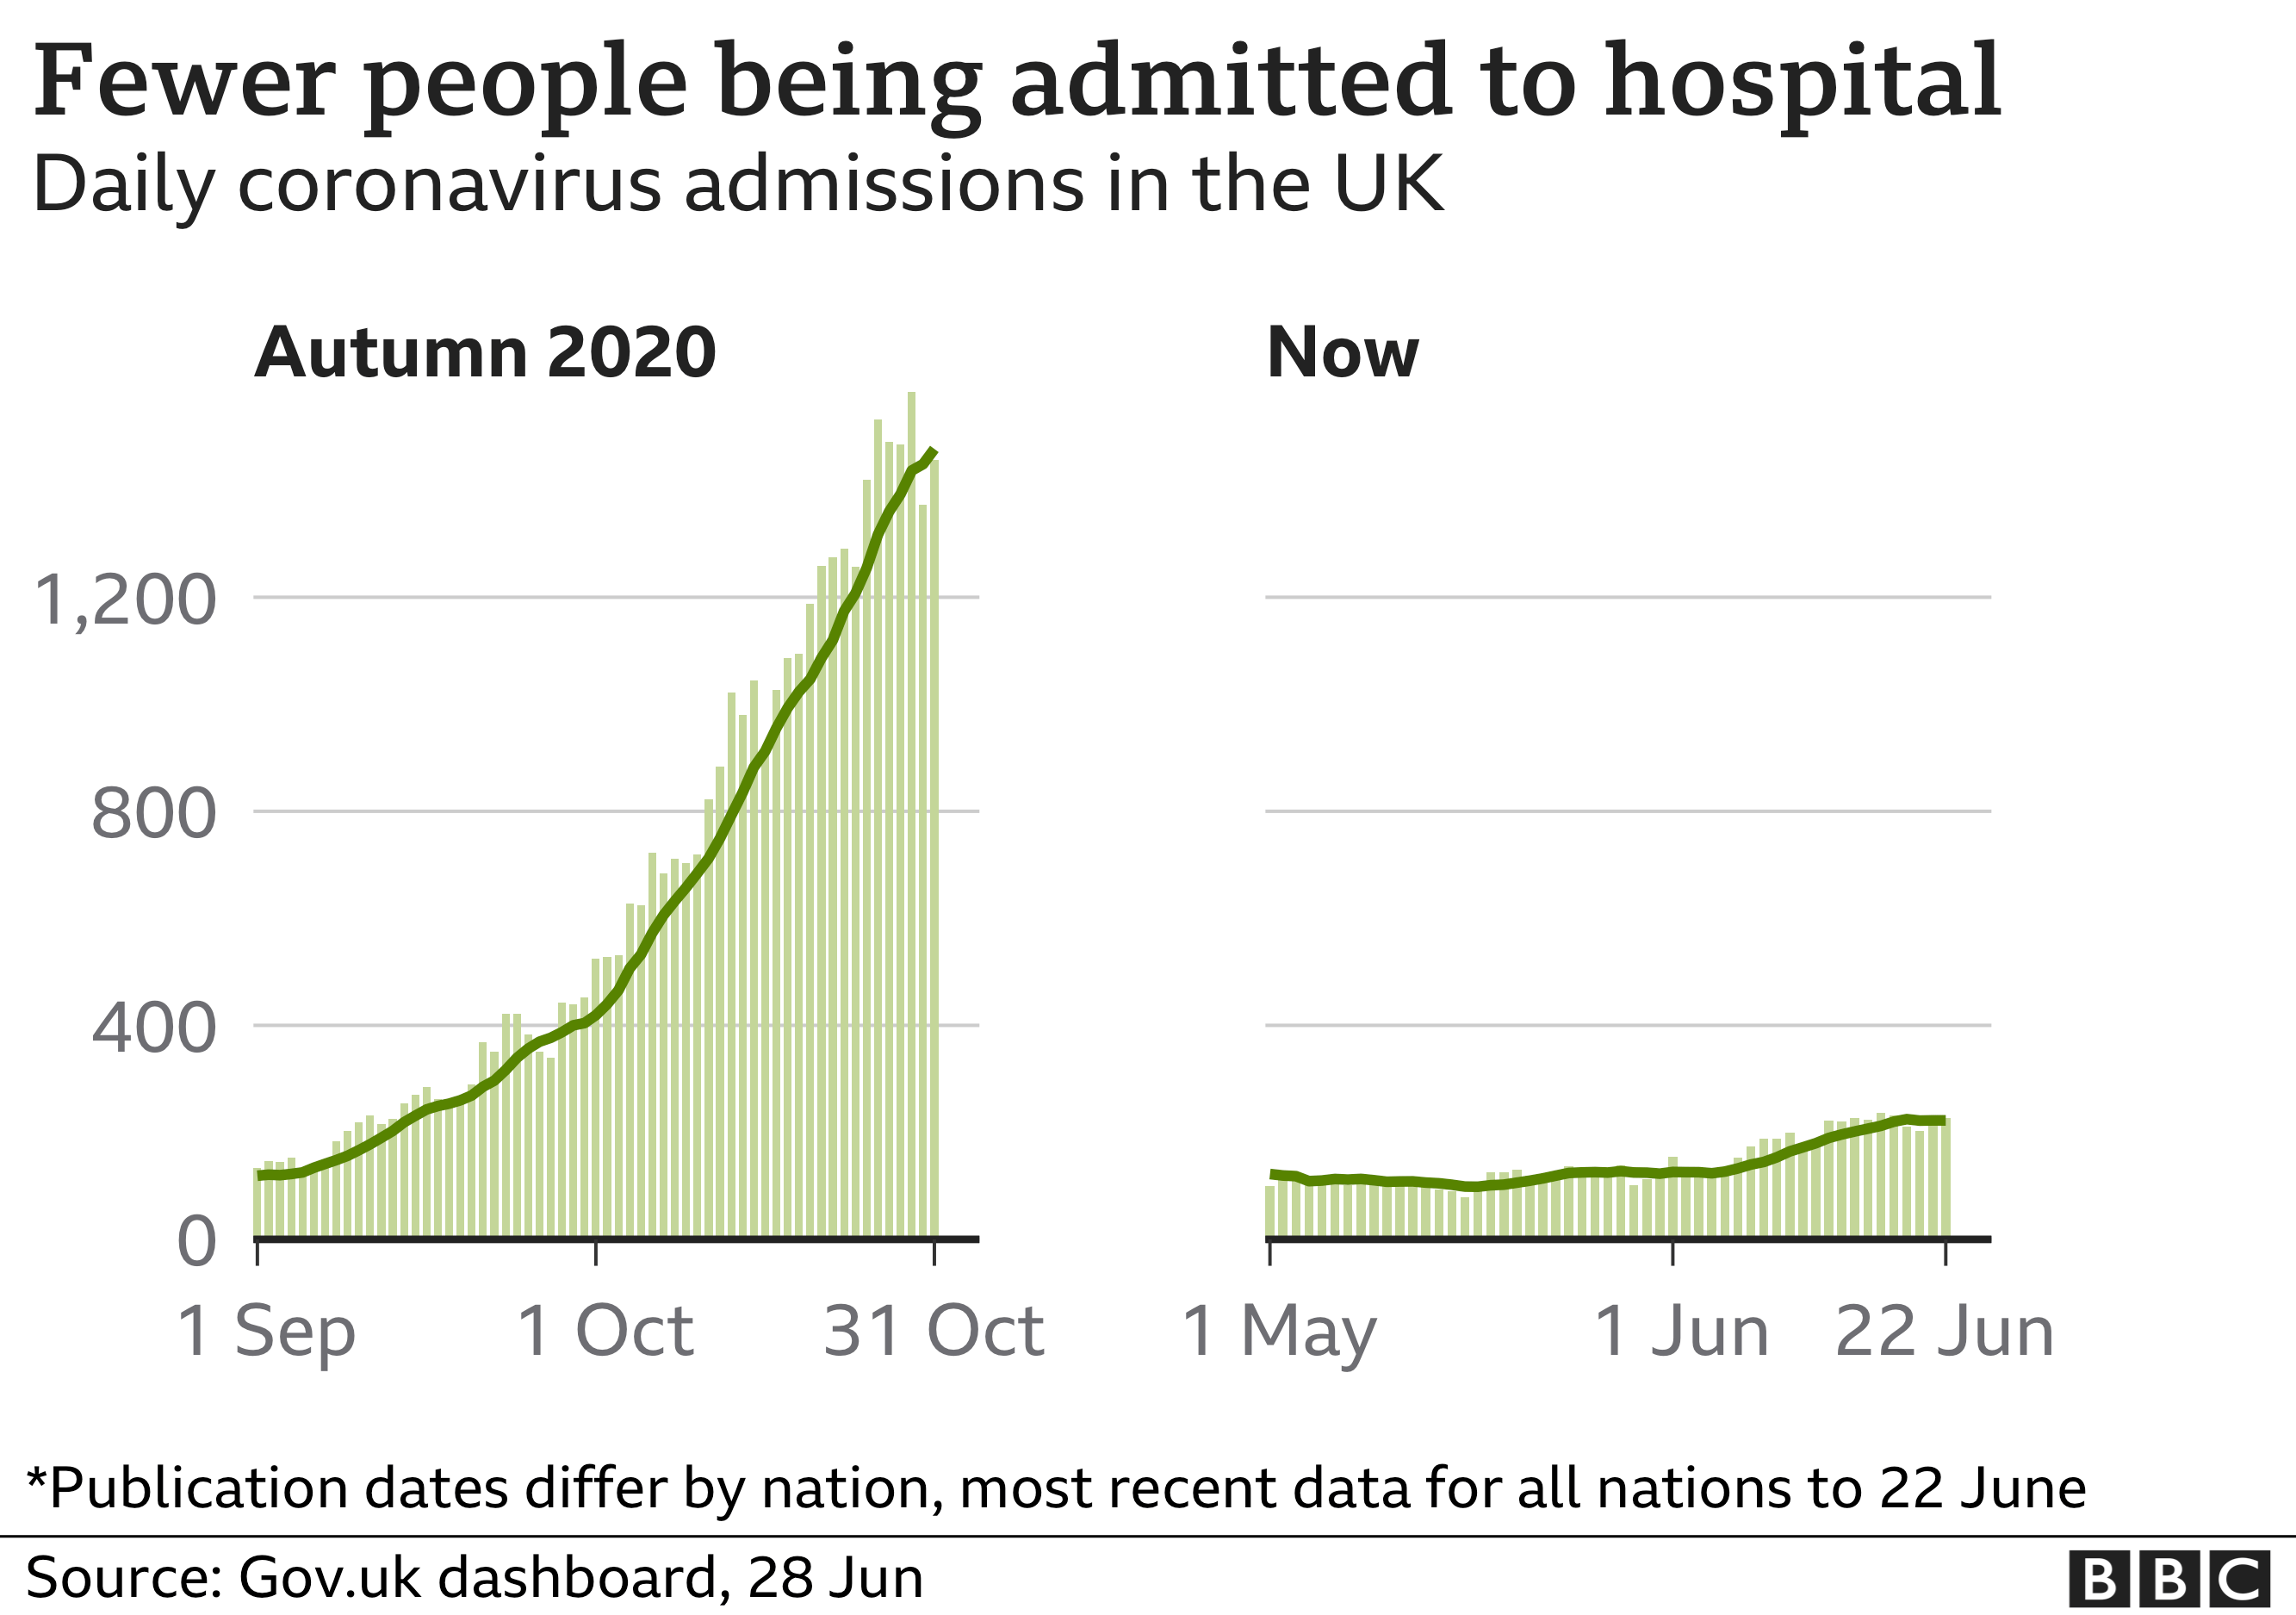 Graphs contrasting the number of people being hospitalised in UK in autumn and now